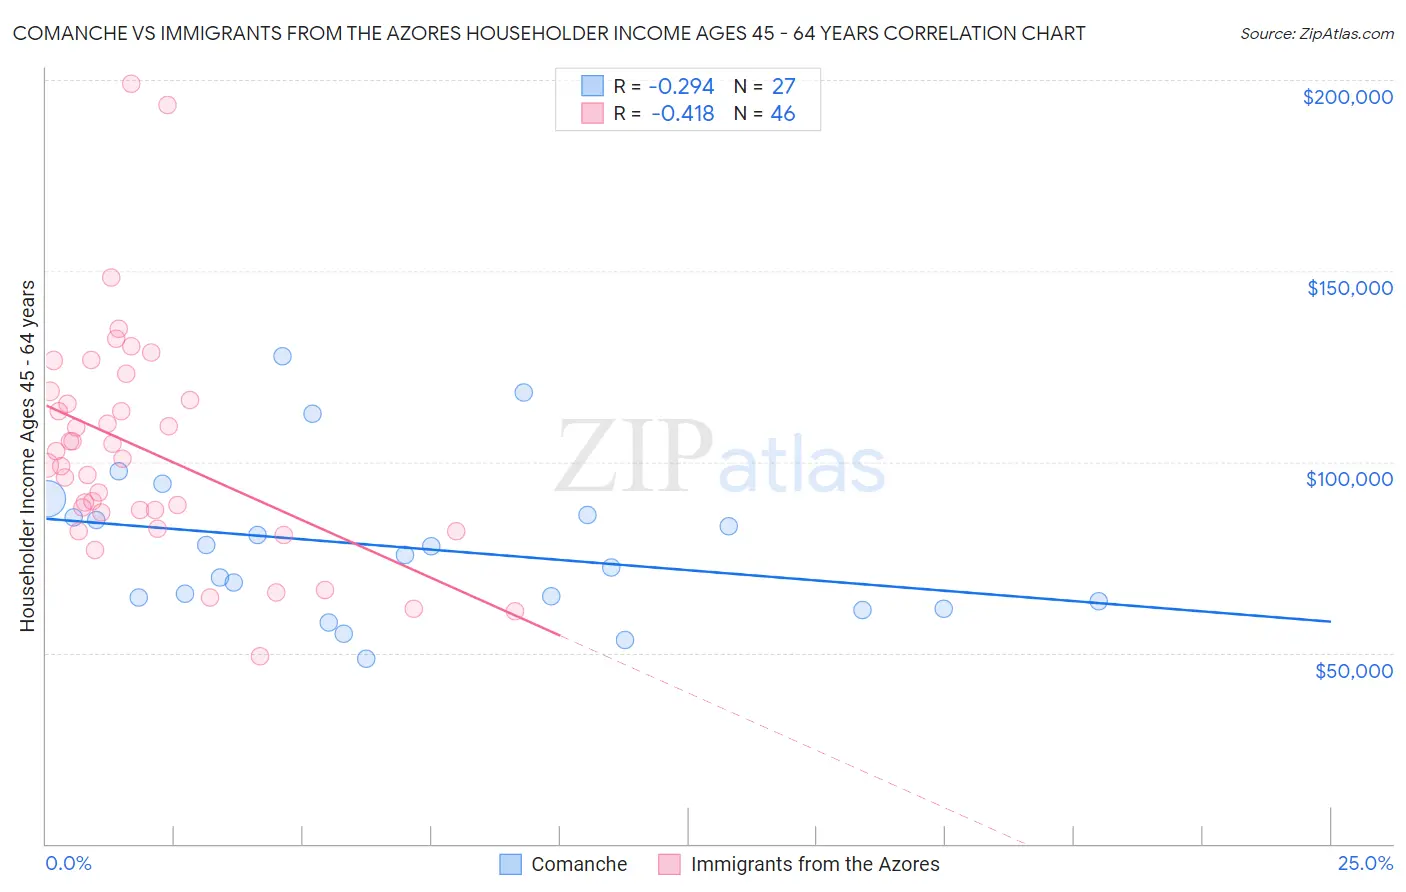 Comanche vs Immigrants from the Azores Householder Income Ages 45 - 64 years